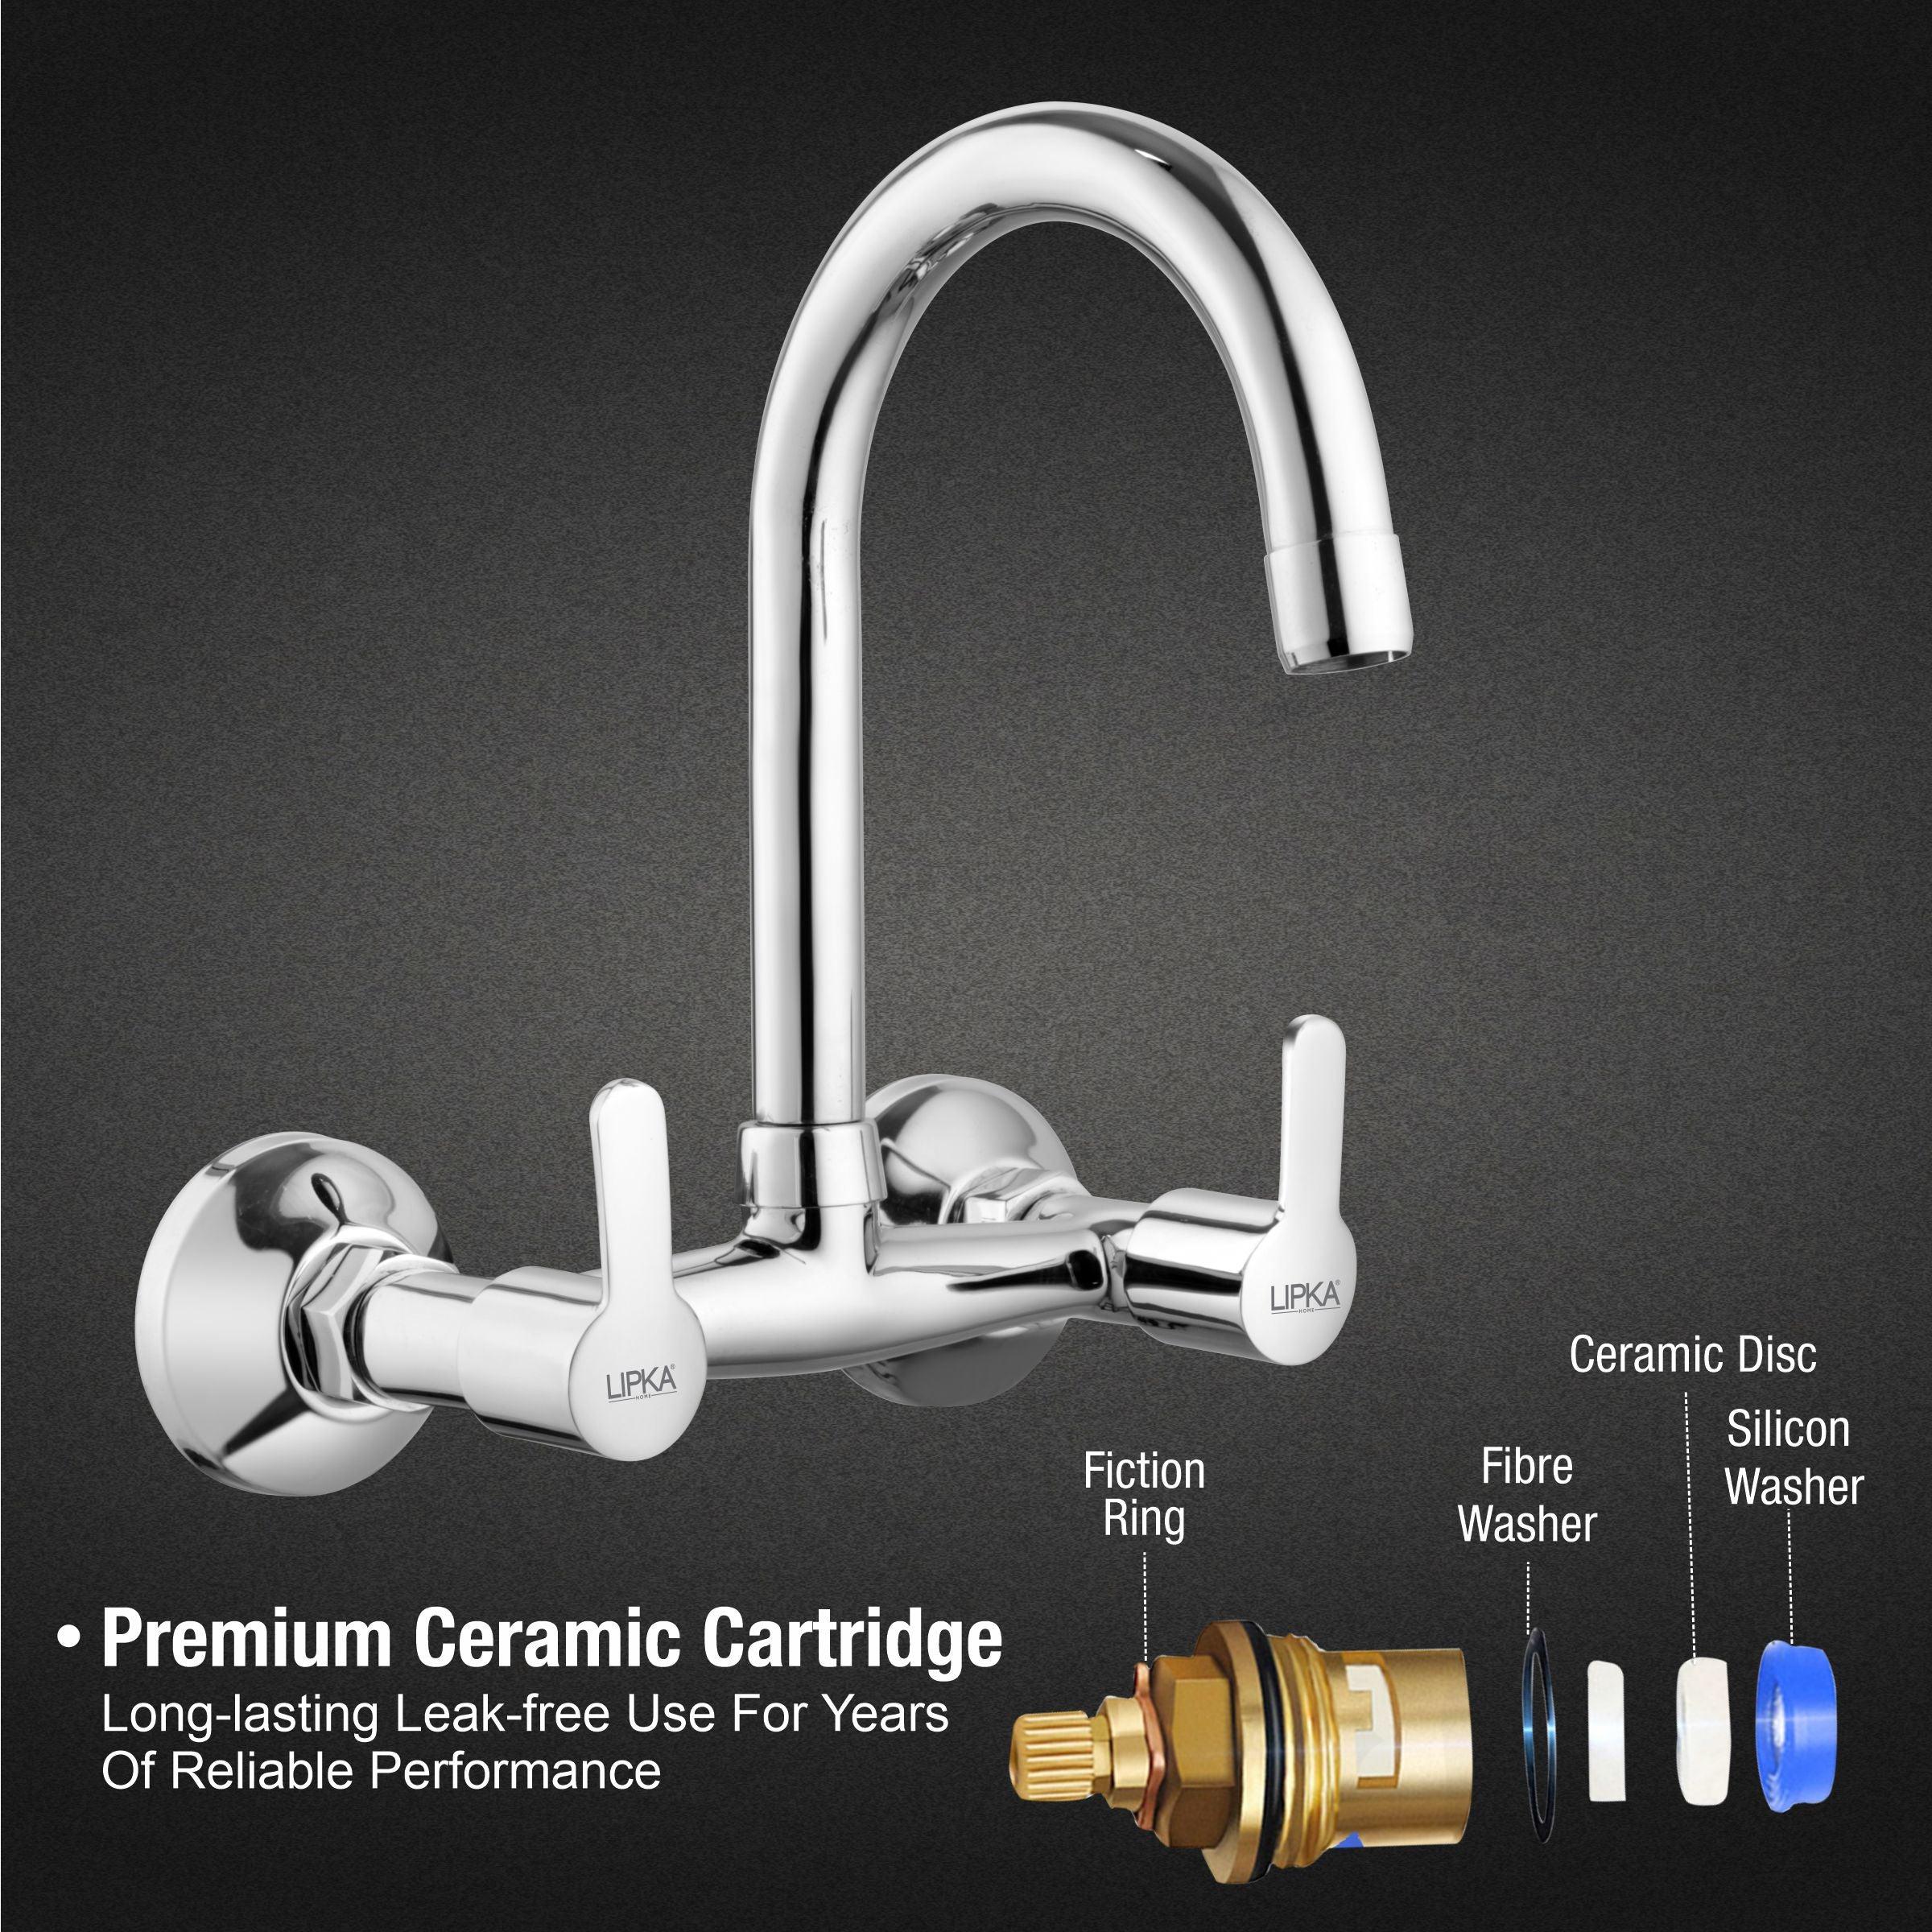 Frenk Sink Mixer Brass Faucet with Round Swivel Spout (15 Inches) product details